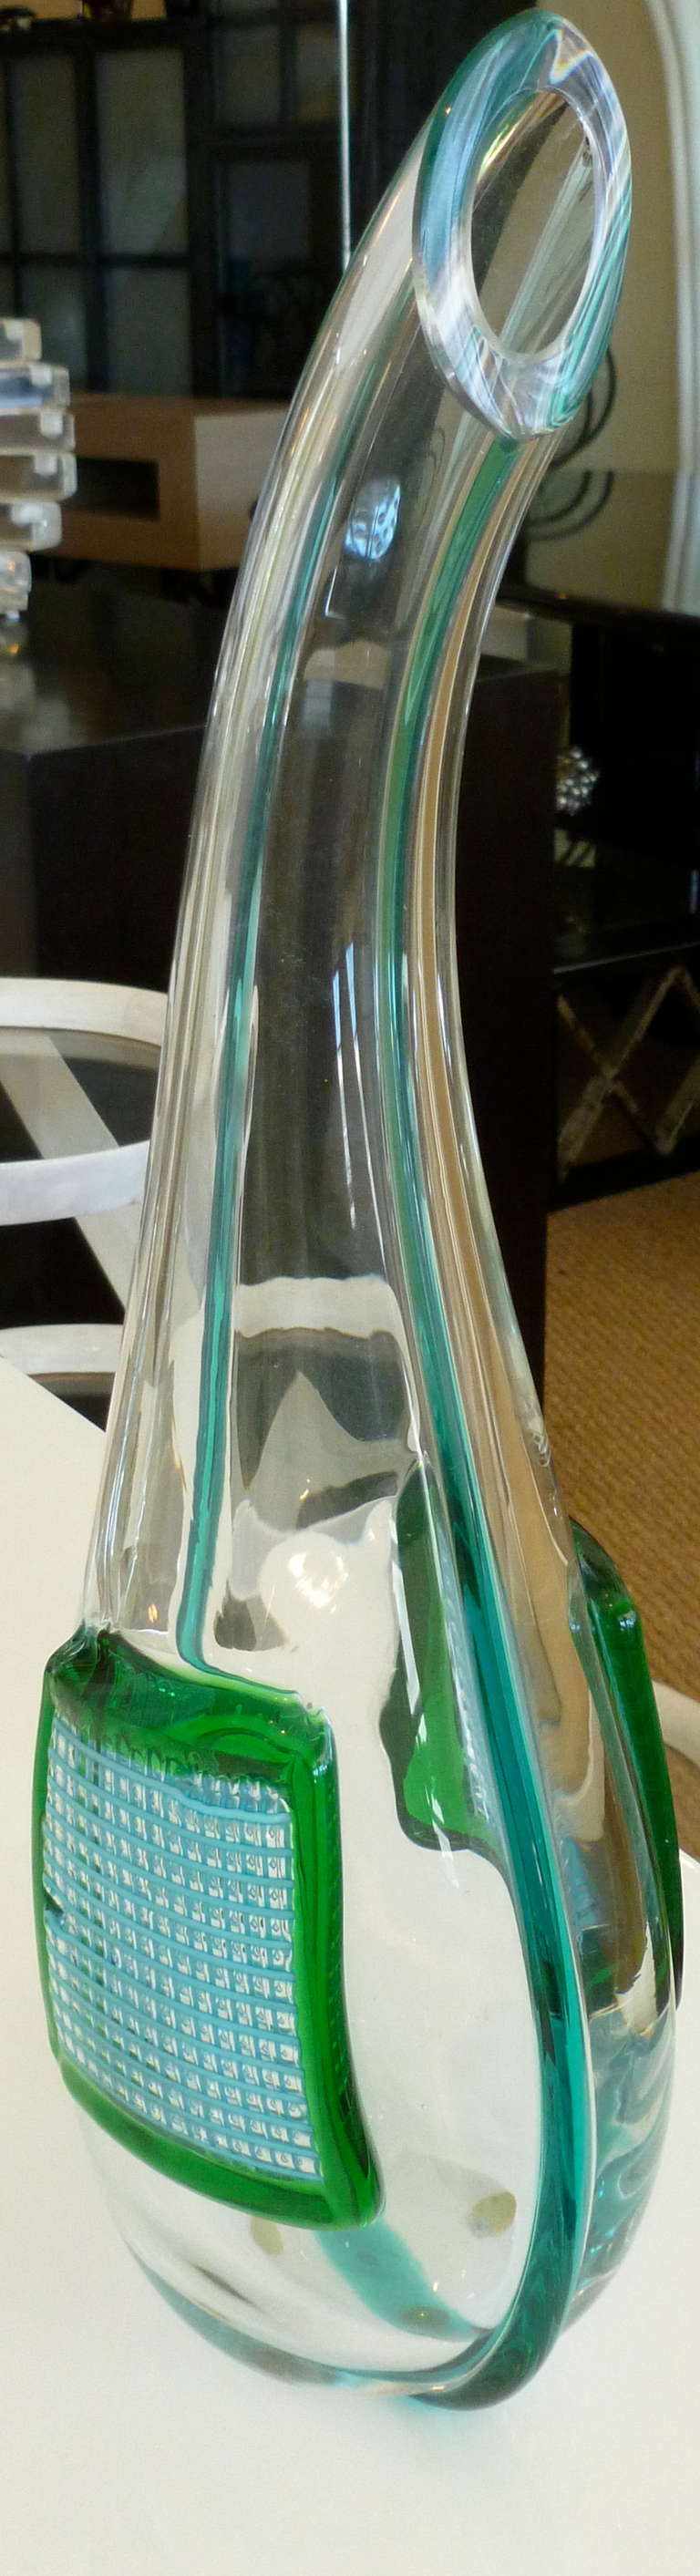 This one of a kind work signed by the eminent Italian Murano artist: Massimiliano Schiavon has the luscious colors of the sea in turquoise and greens applied grid square against the clear glass. The raised and textural glass on both sides is